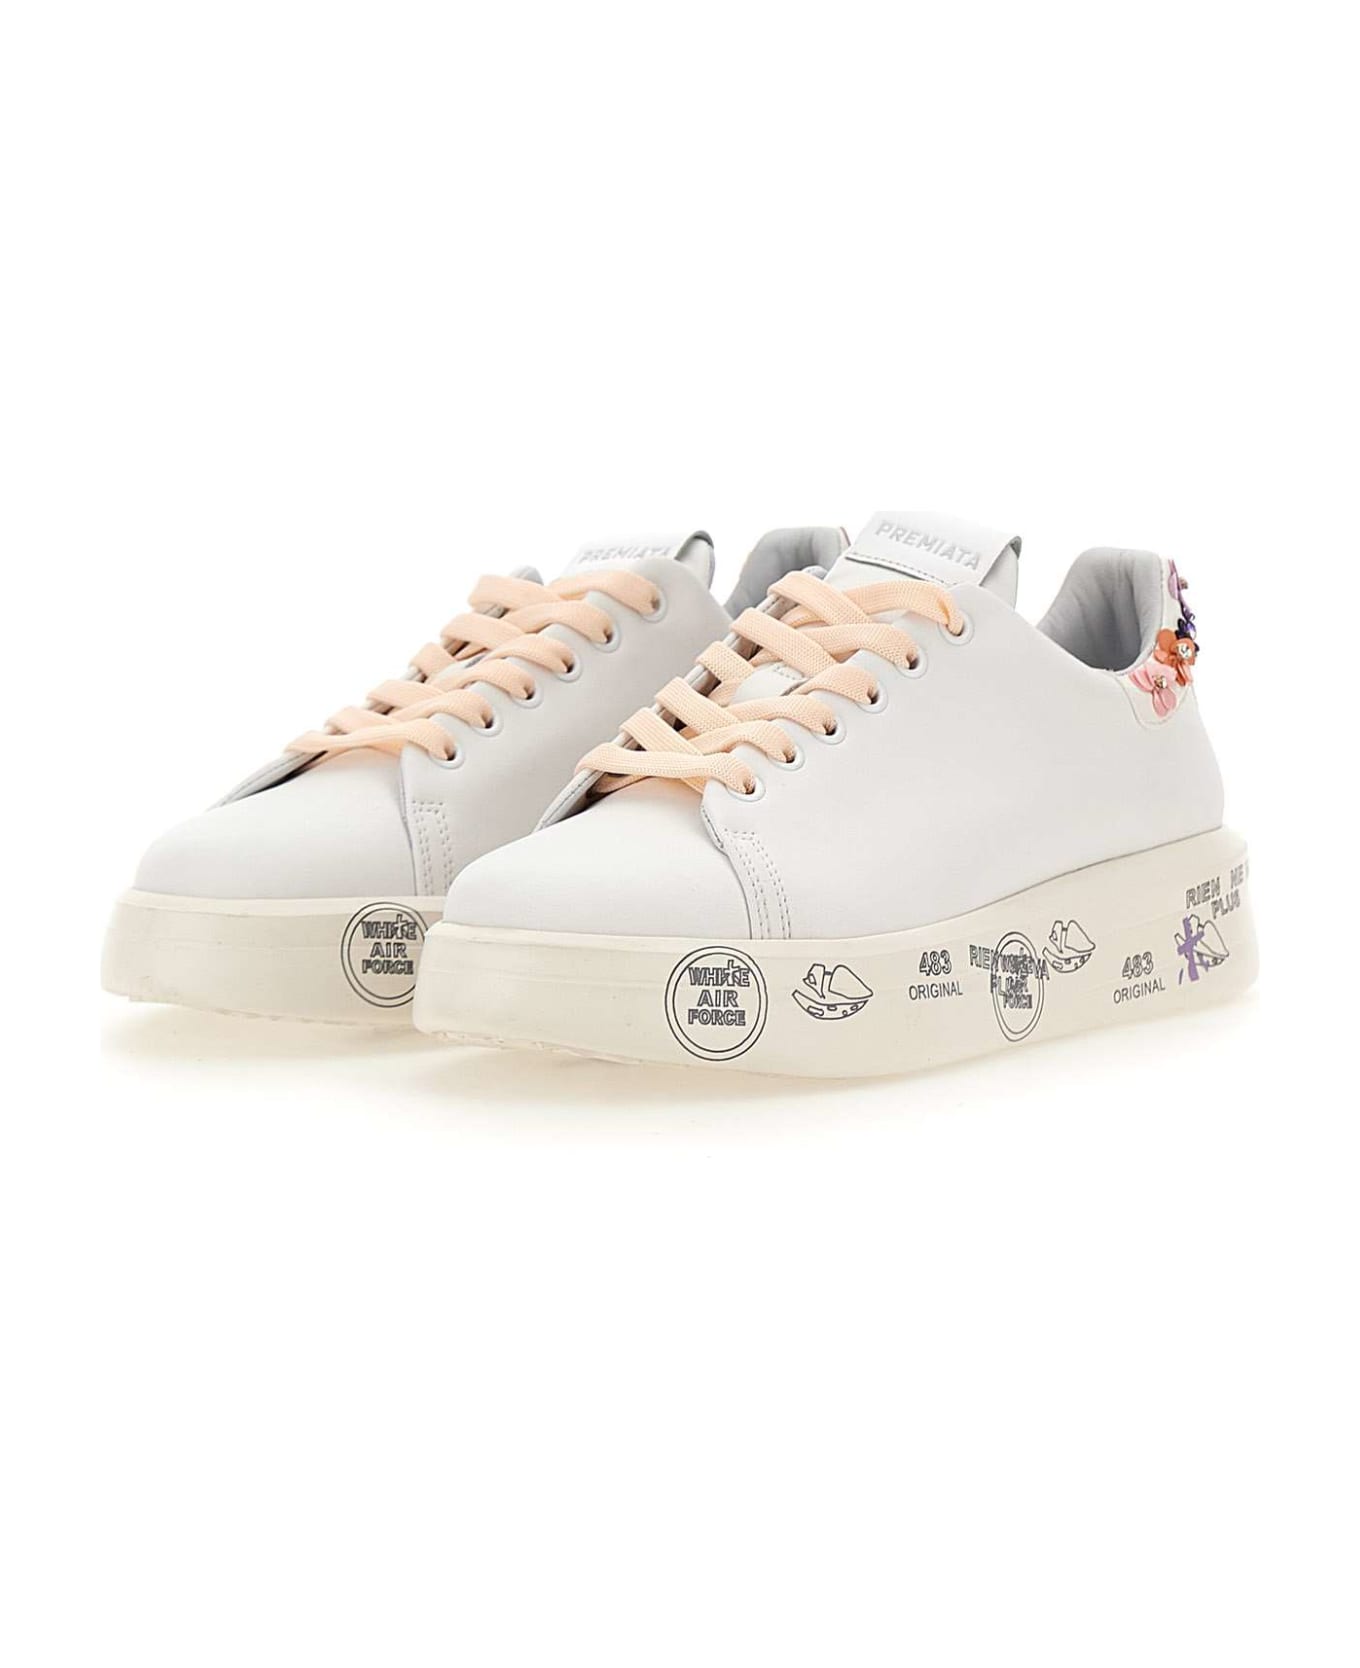 Premiata "belle6709" Leather Sneakers - white/Pink